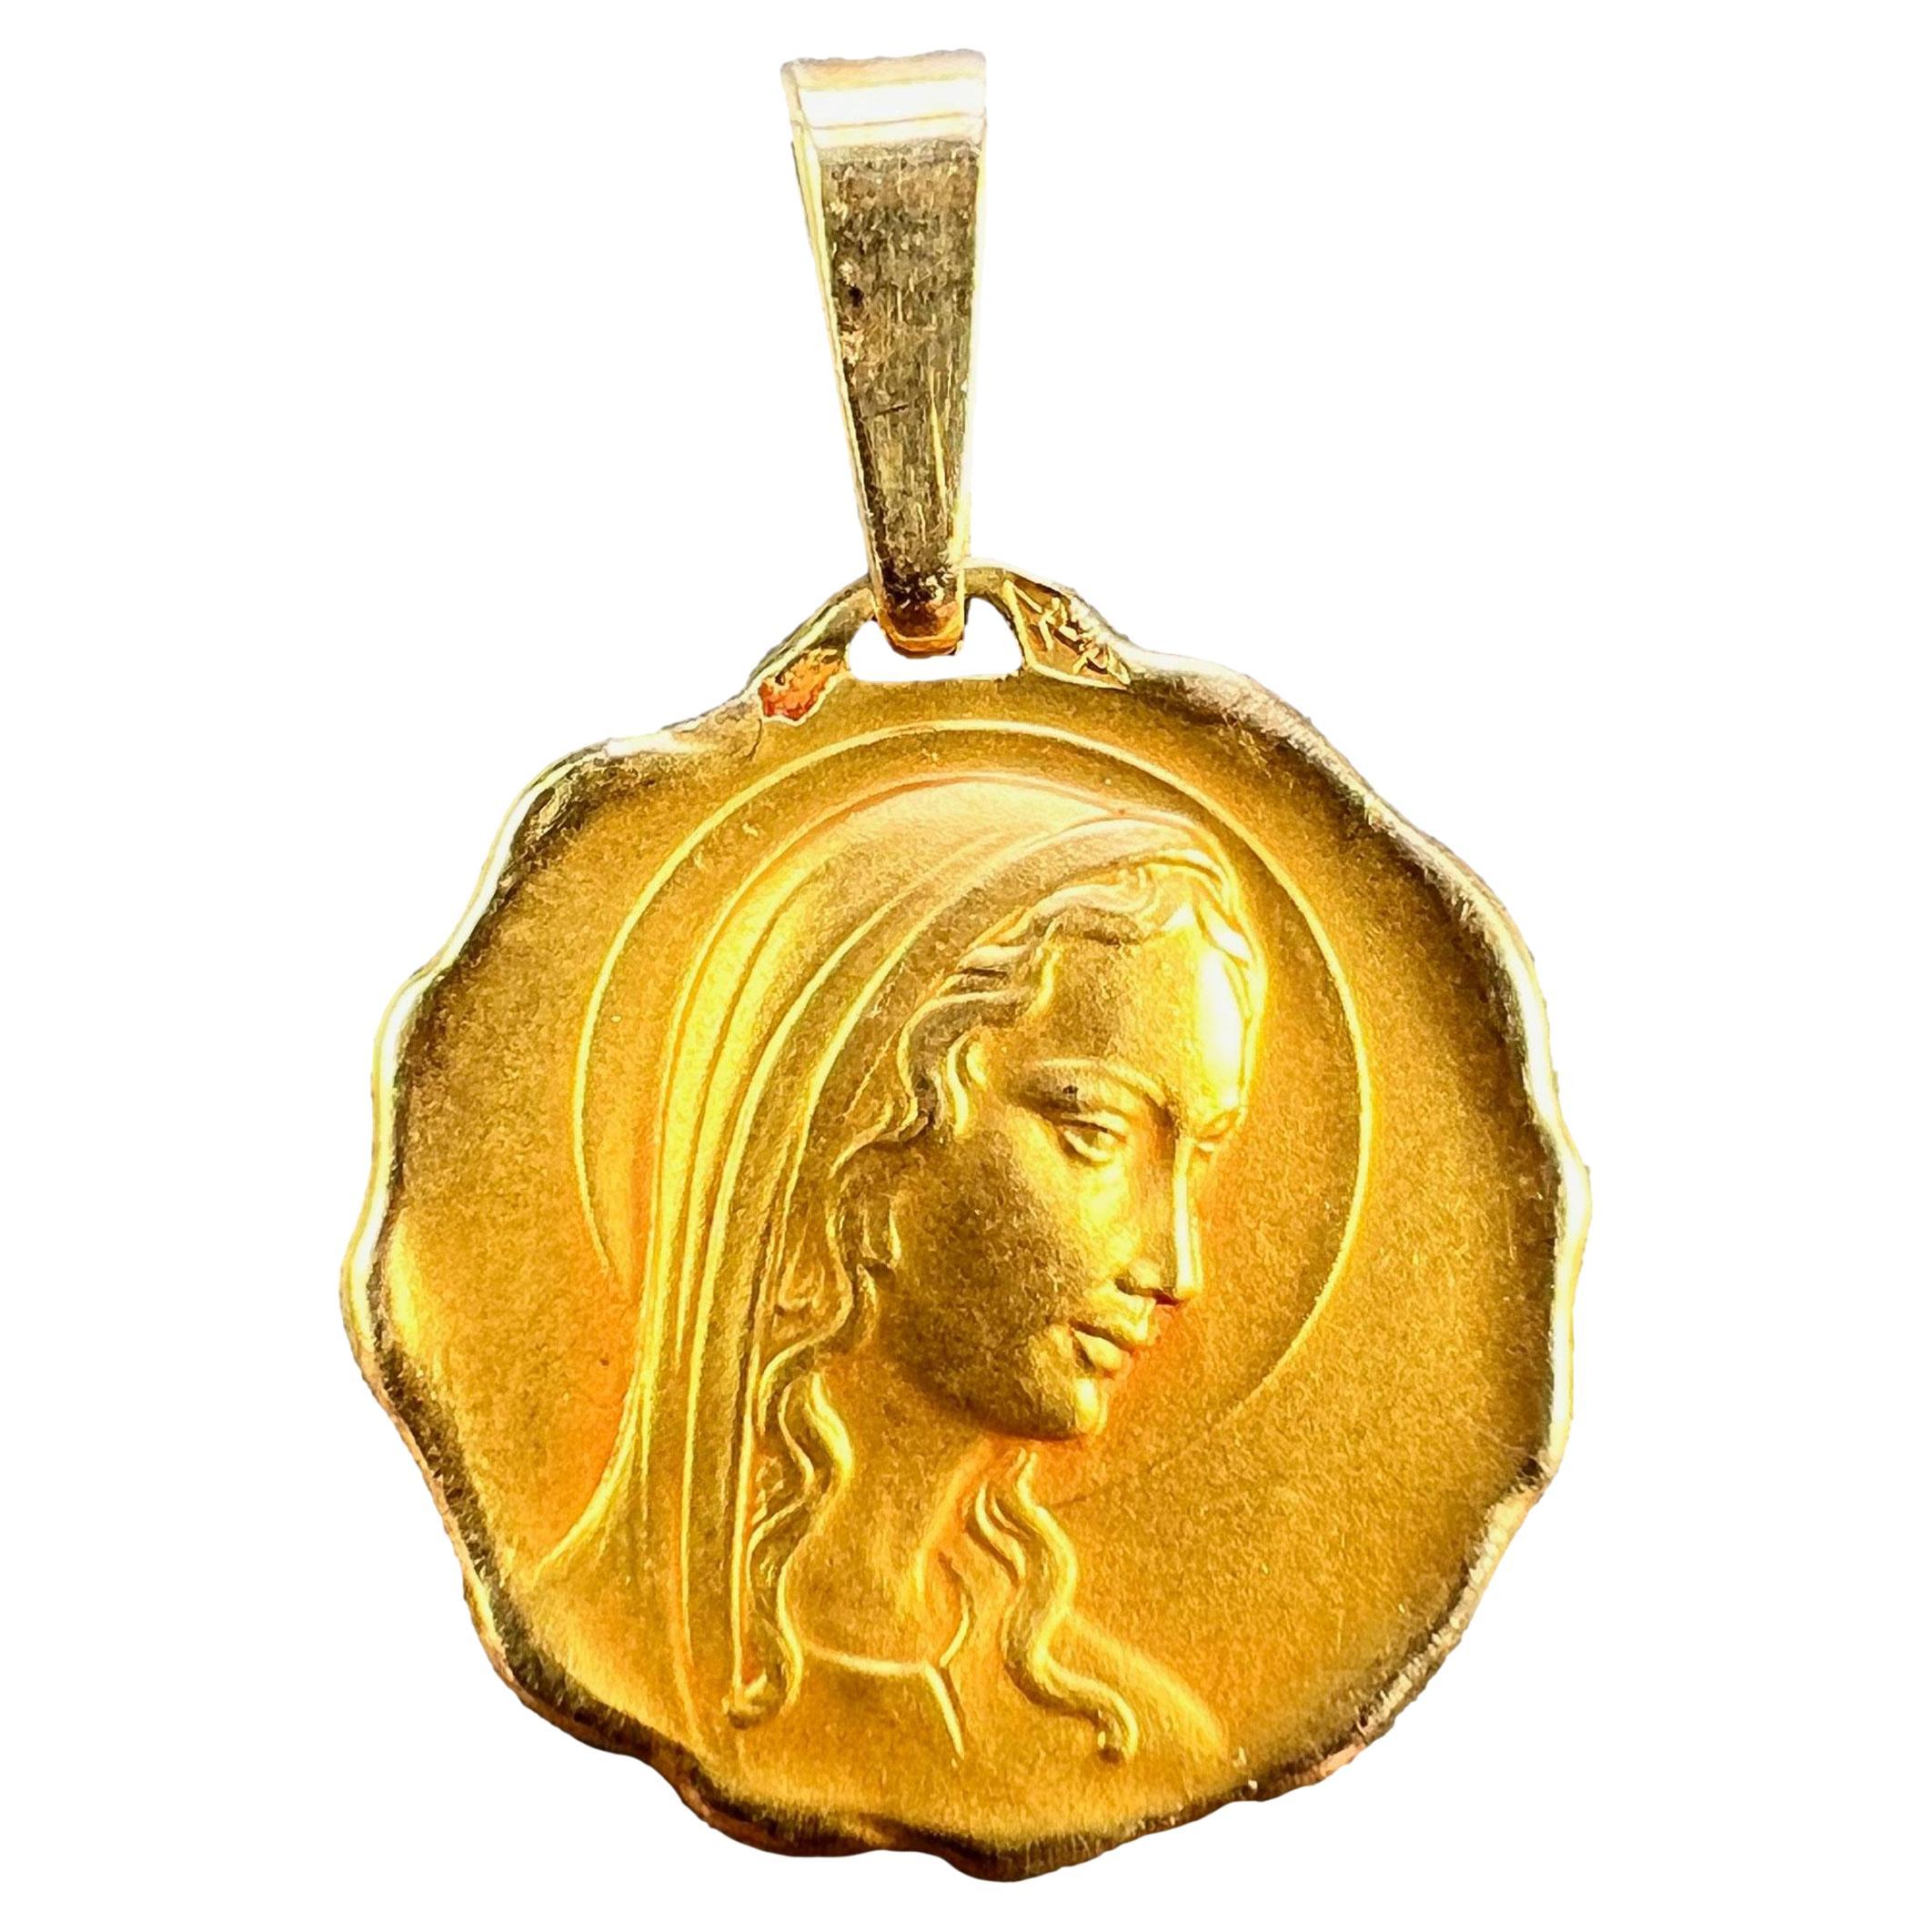 French Virgin Mary 18K Yellow Gold Religious Medal Pendant For Sale